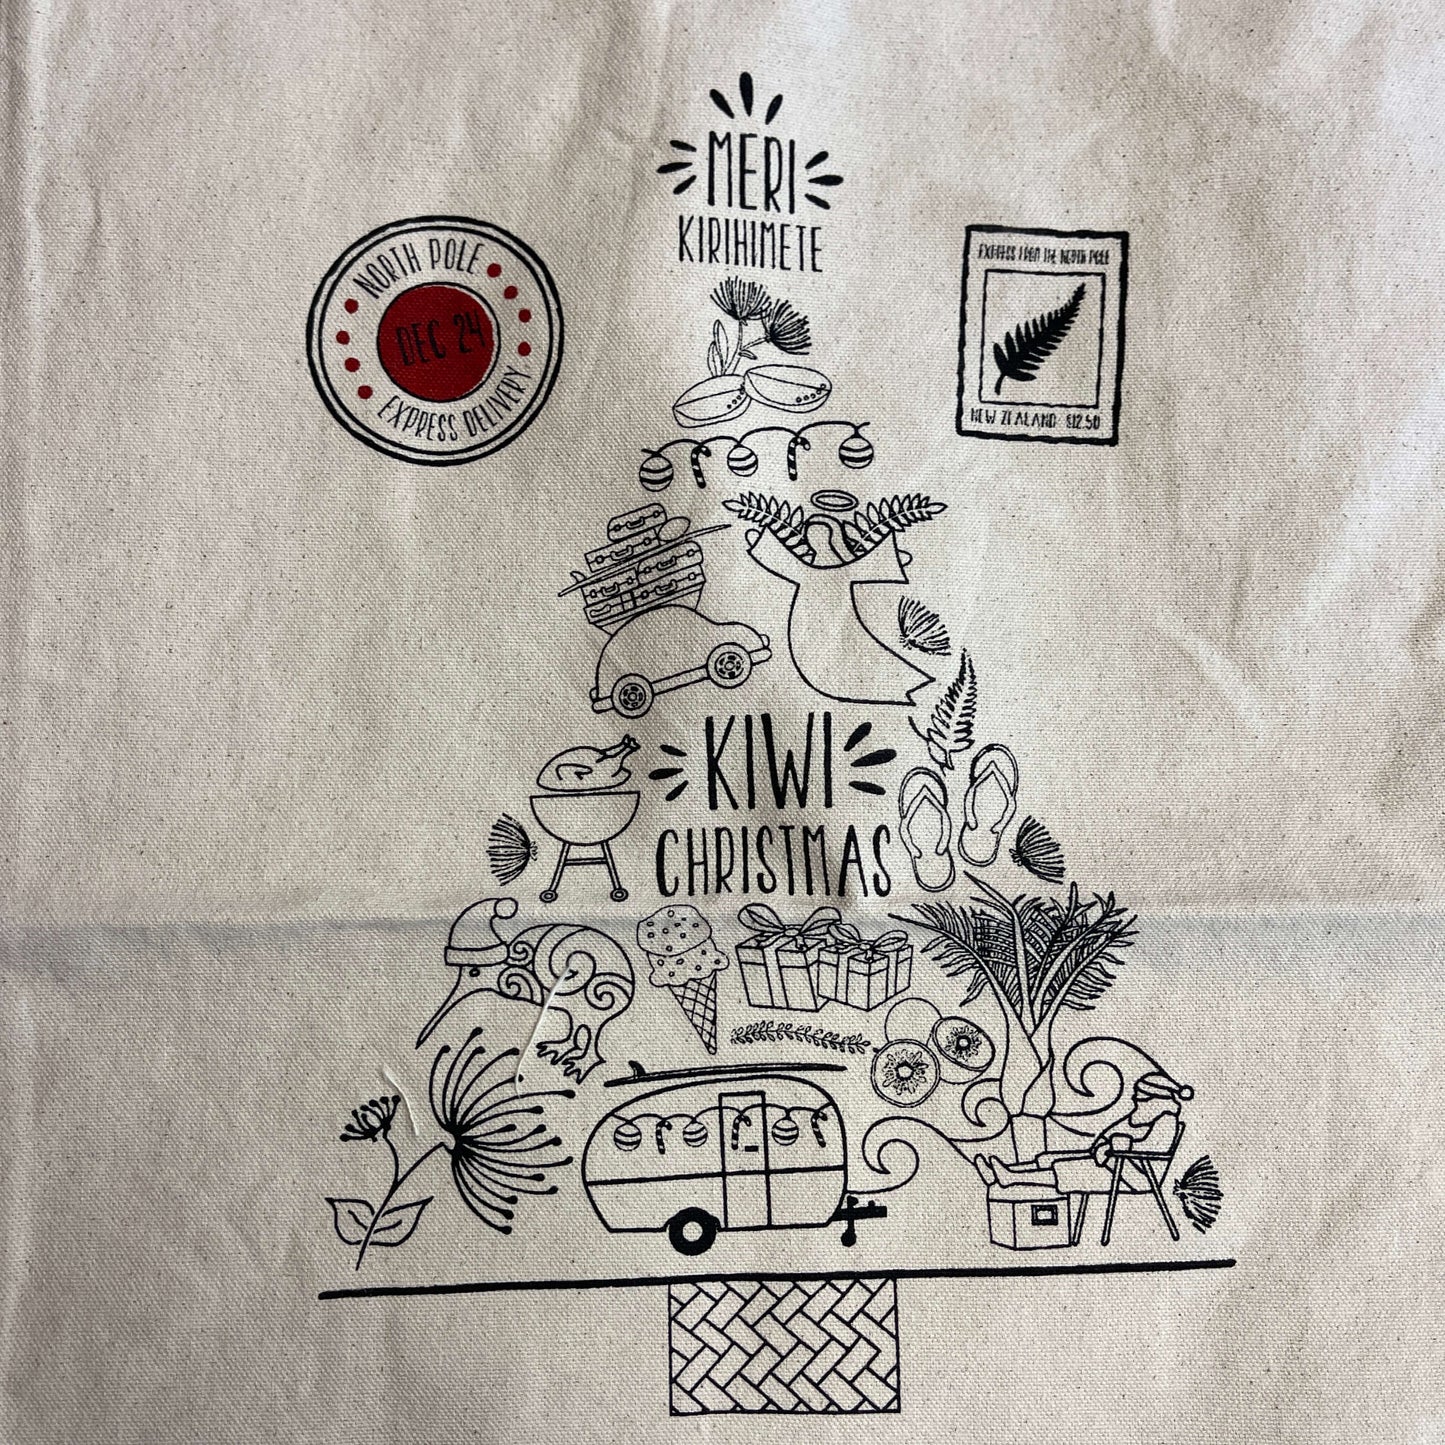 Printing on a Christmas sack featuring a tree made up of Kiwiana icons.